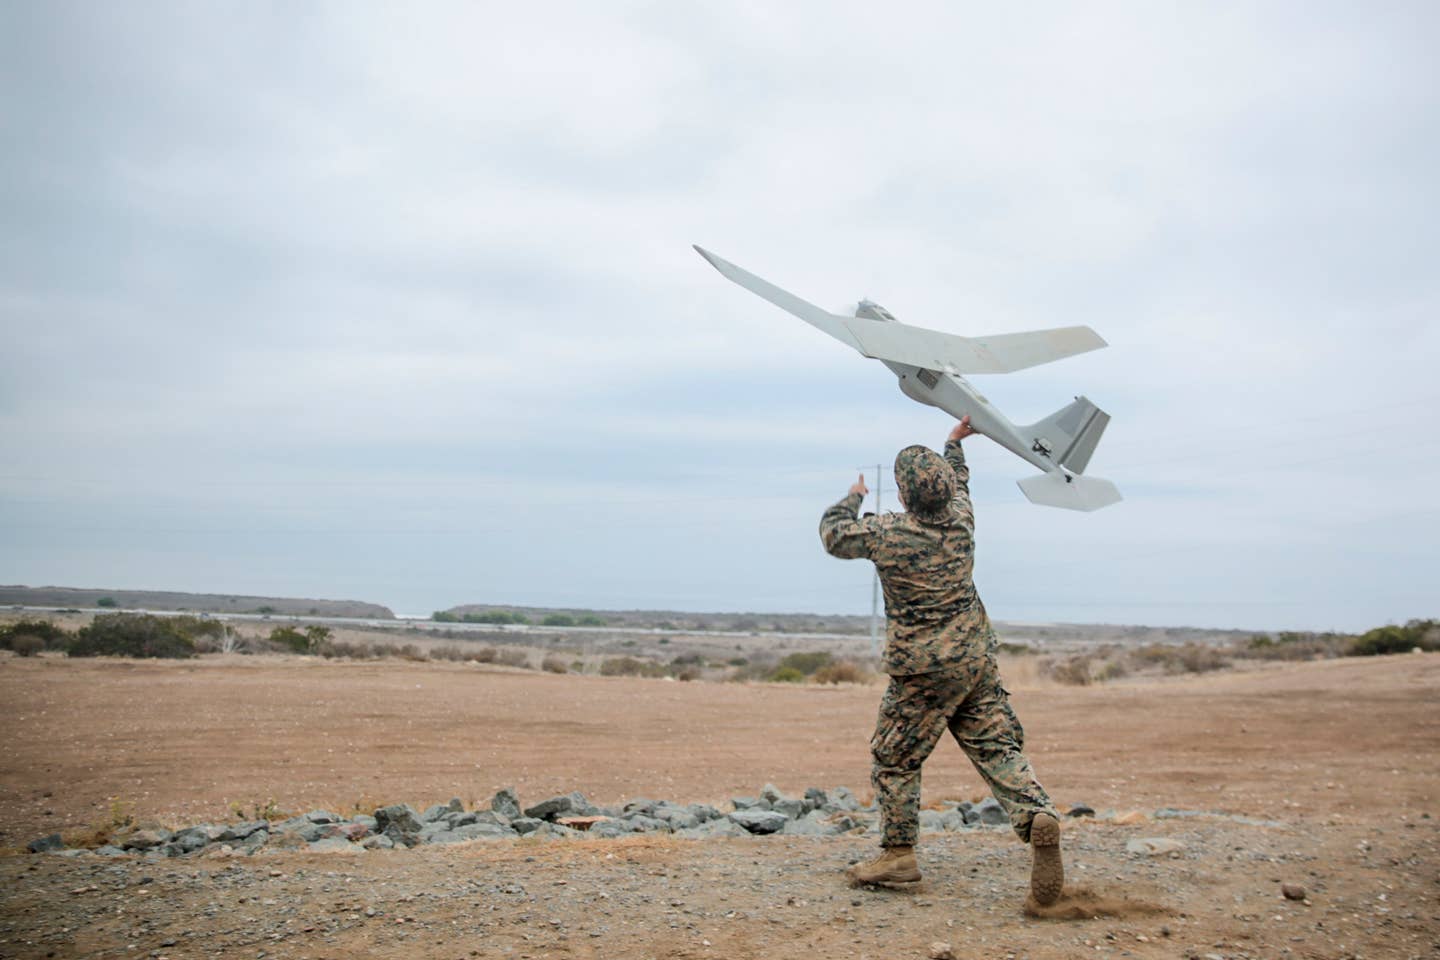 U.S. Marine Corps Sgt. Joseph Wiseman launches an RQ-20 Puma in support of 1st ANGLICO's field exercise on Marine Corps Base Camp Pendleton, California, Oct. 12, 2022. <em>Credit: U.S. Marine Corps photo by Sgt. Sarah Stegall</em>